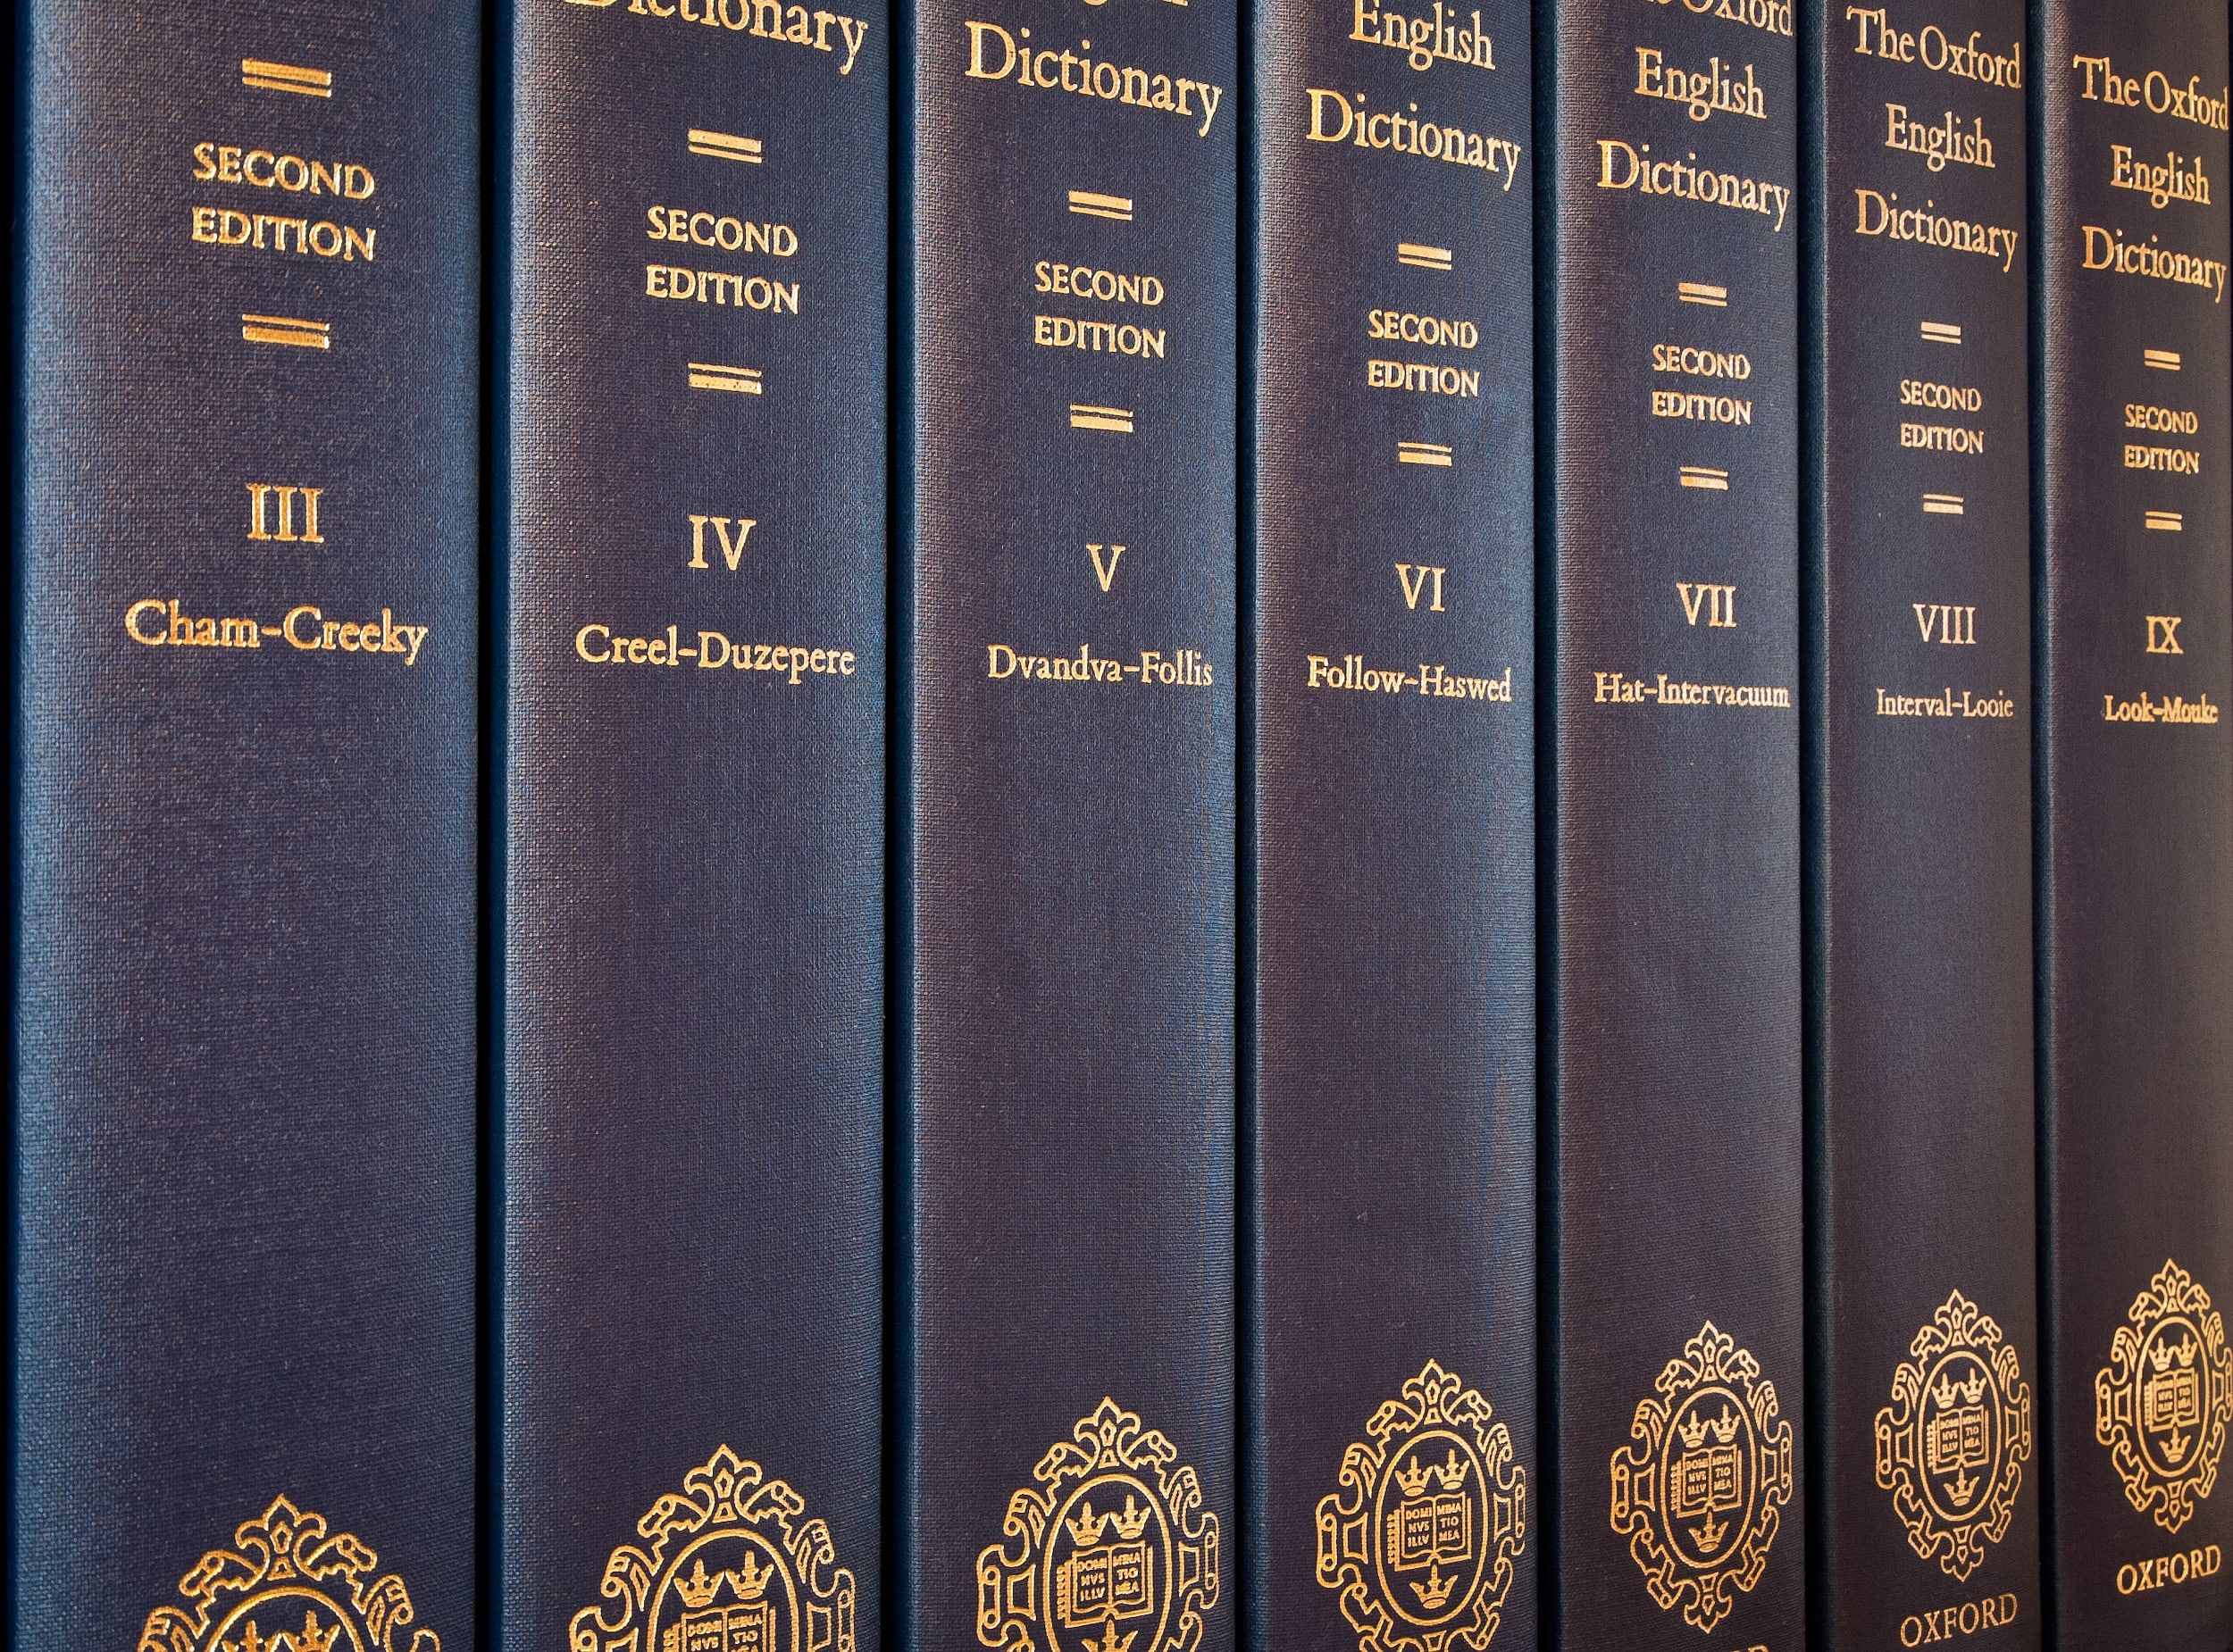 The 10th edition of the dictionary, which was launched on Friday, has 384 Indian English words and incorporates over 1,000 new words such as chatbot, fake news and microplastic. (Wikimedia Commons Photo)